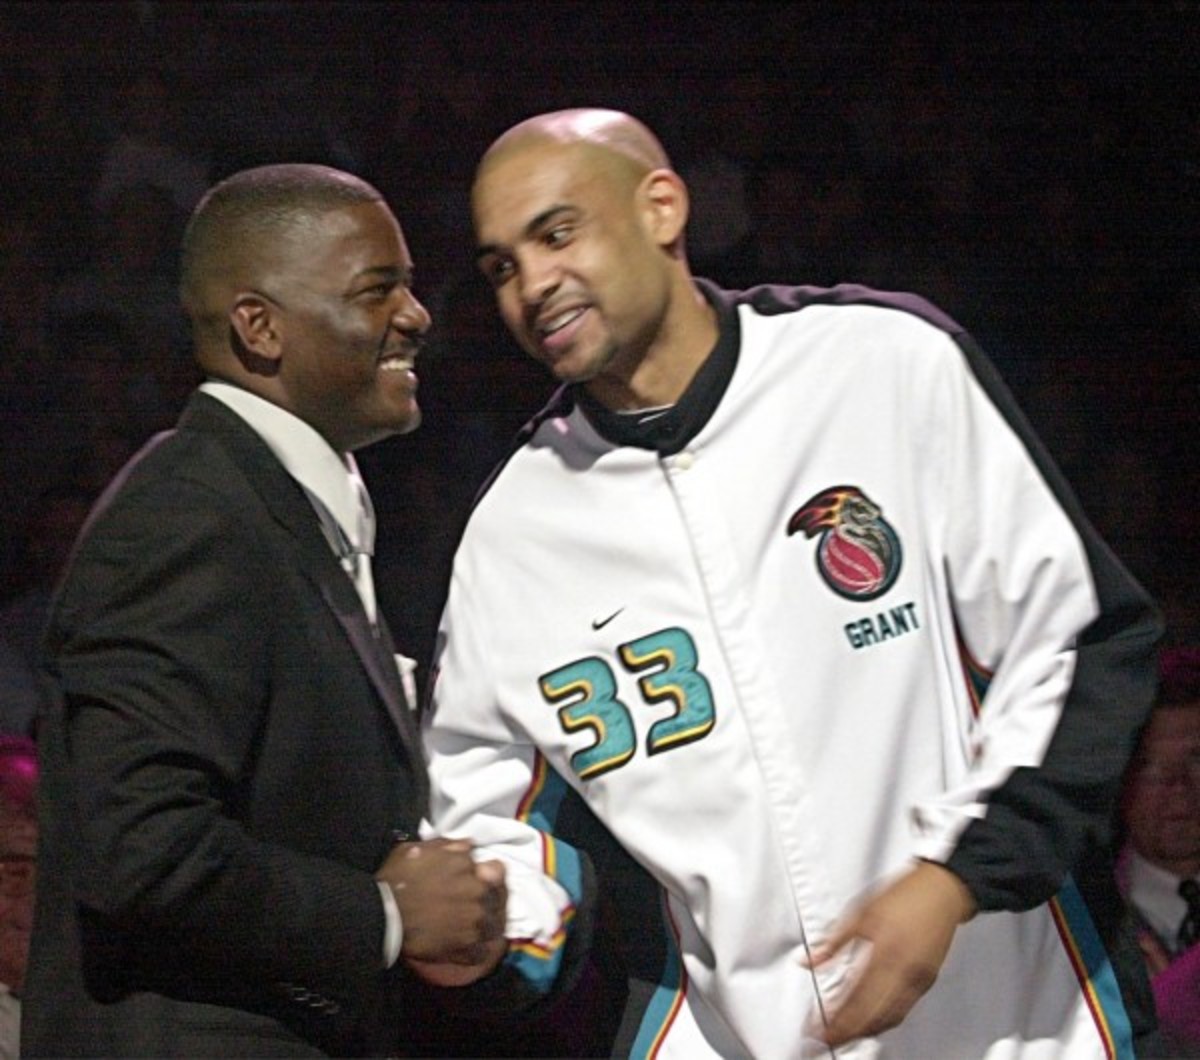 Grant Hill played for the Pistons when Joe Dumars joined Detroit's front office in 2000. (Jeff Kowalsky/Getty Images)